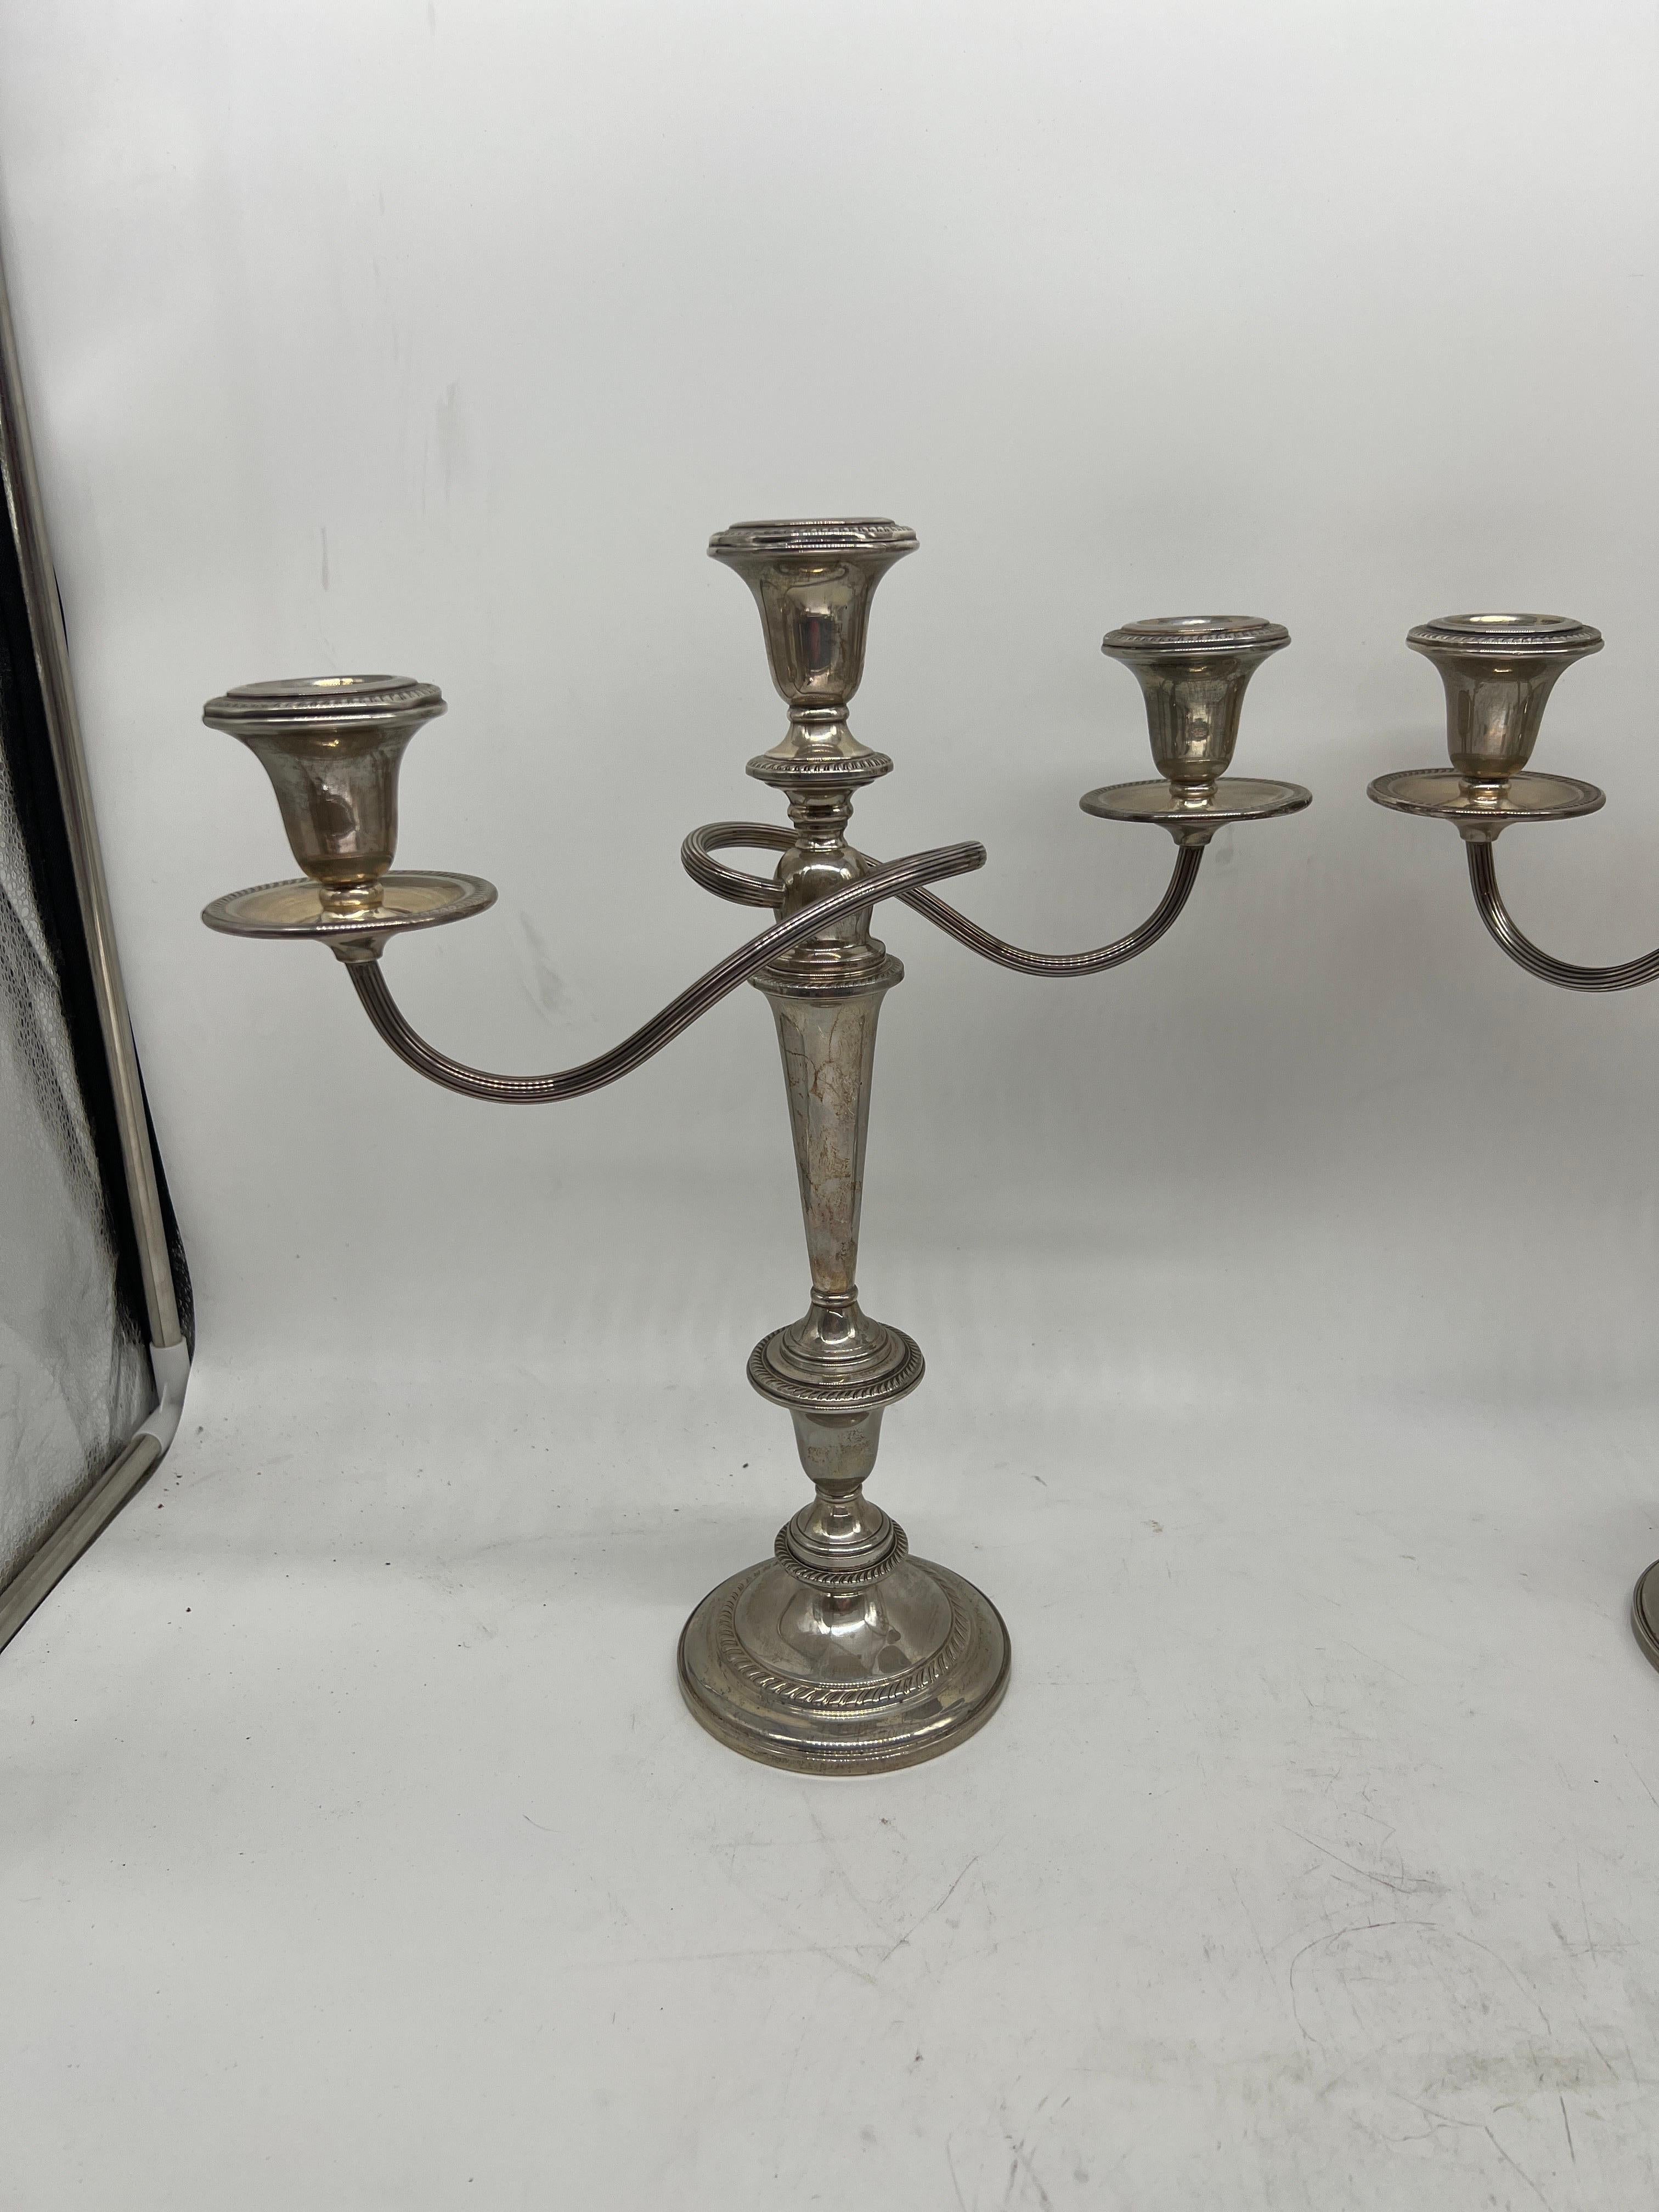 Mid-20th Century Pair of Weighted, Sterling Convertible, Three Light Candelabra, Hamilton silversmith makers, with gadrooned rims, thistle sconces, reeded bypass candle arms, tapering cylindrical stem and domed foot. Each piece appropriately marked.